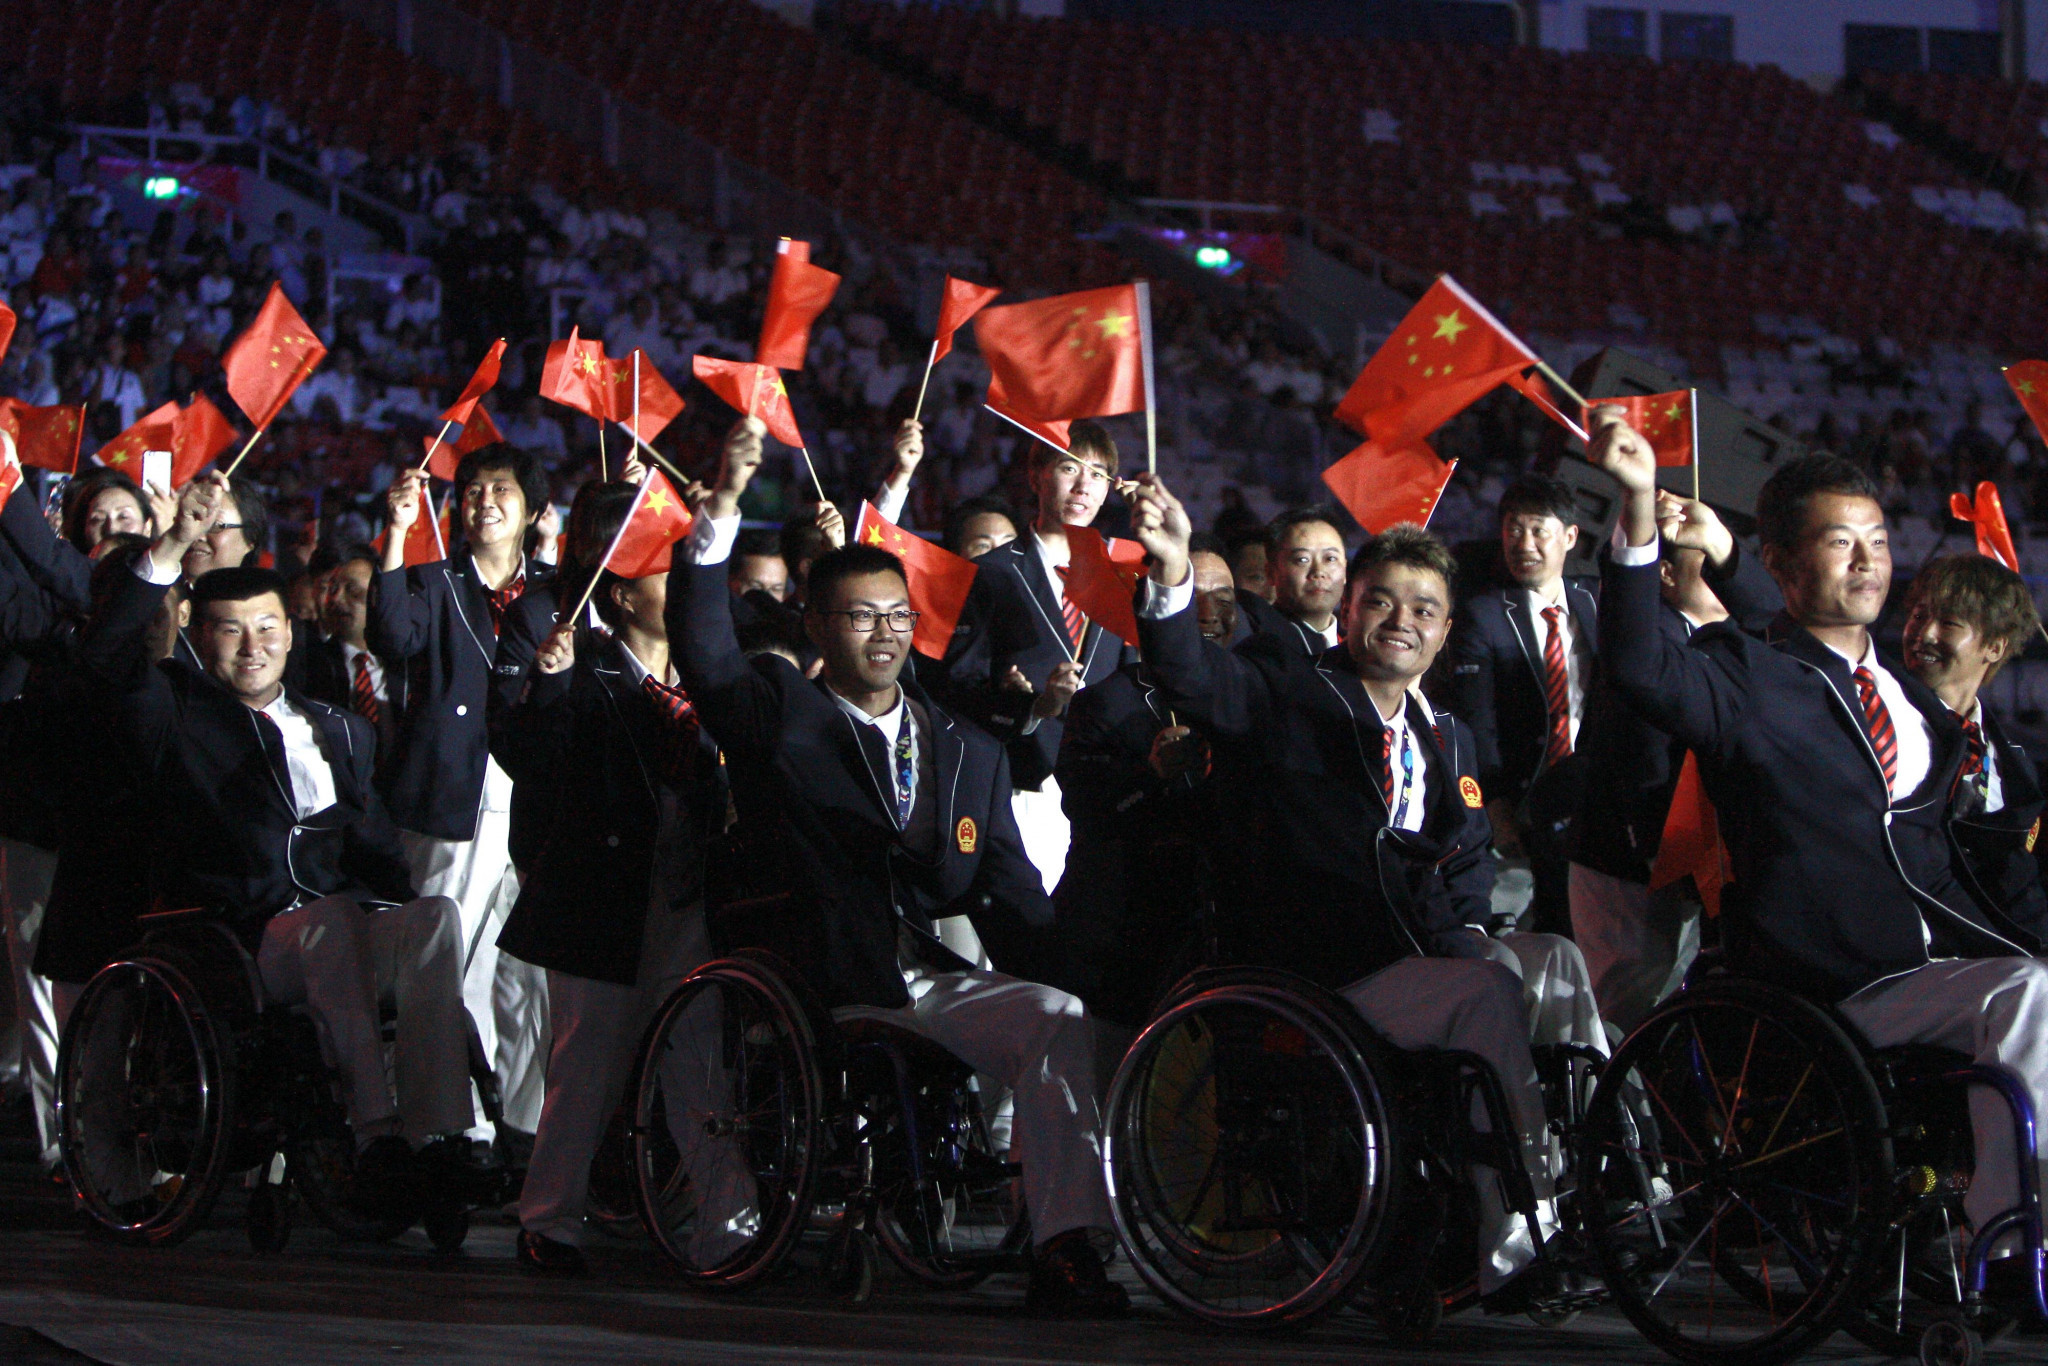 Approximately 4,000 competitors in 22 sports are expected at next year's Asian Para Games ©Getty Images